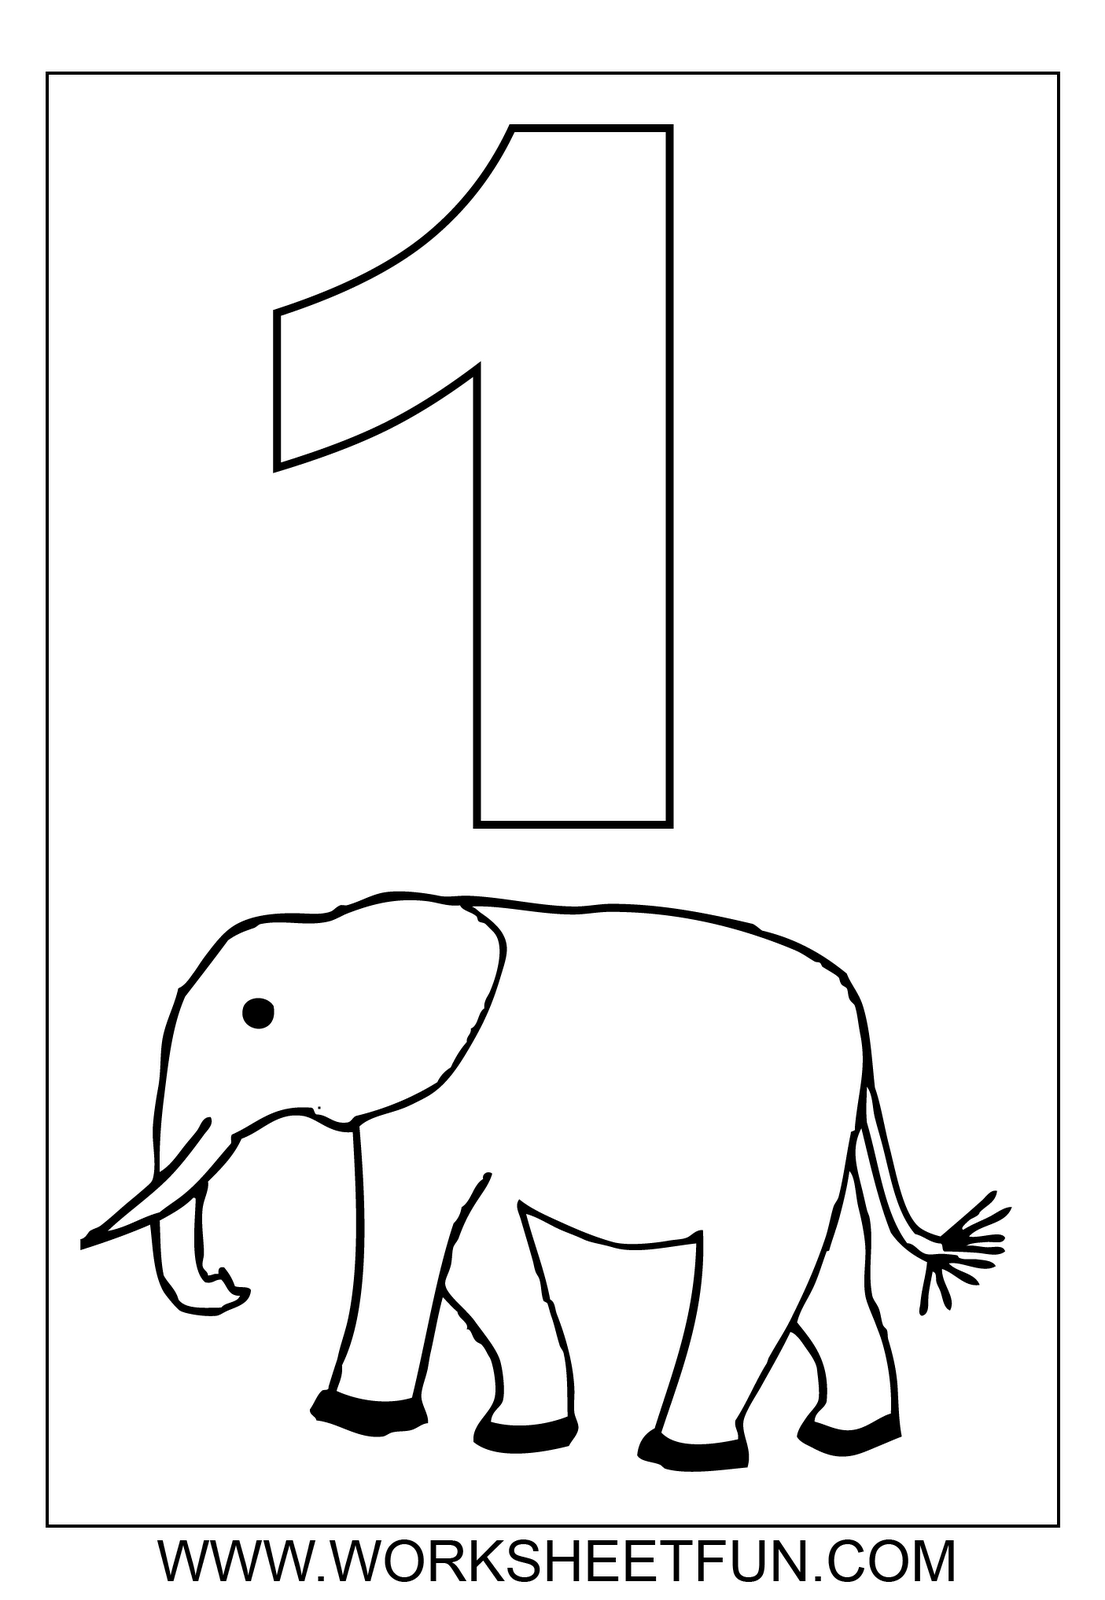 Preschool Number 1 Coloring Page Image